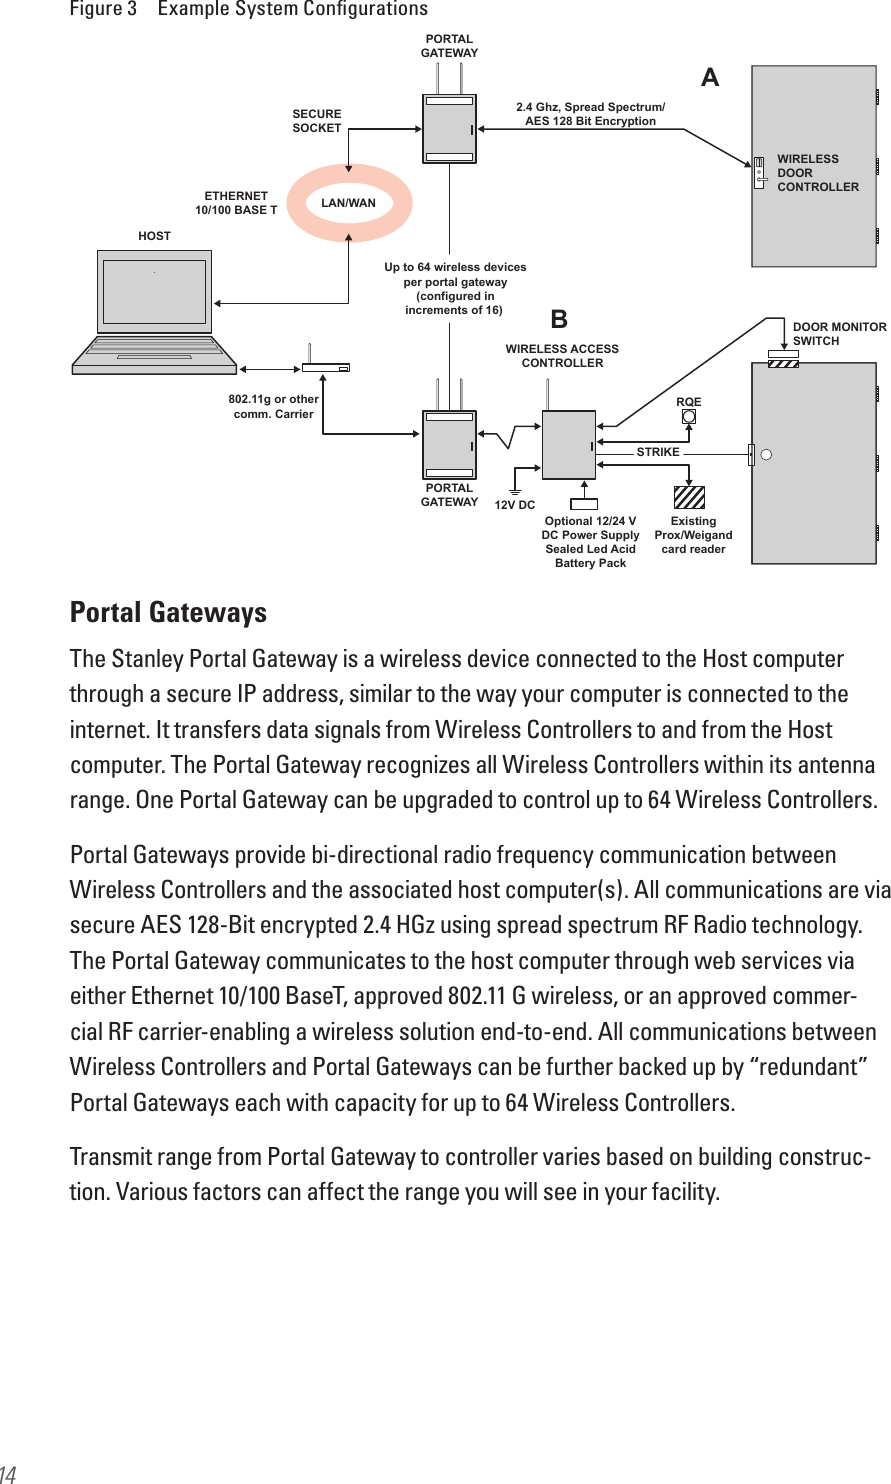 14Figure 3  Example System ConﬁgurationsPortal GatewaysThe Stanley Portal Gateway is a wireless device connected to the Host computer through a secure IP address, similar to the way your computer is connected to the internet. It transfers data signals from Wireless Controllers to and from the Host computer. The Portal Gateway recognizes all Wireless Controllers within its antenna range. One Portal Gateway can be upgraded to control up to 64 Wireless Controllers.Portal Gateways provide bi-directional radio frequency communication between Wireless Controllers and the associated host computer(s). All communications are via secure AES 128-Bit encrypted 2.4 HGz using spread spectrum RF Radio technology. The Portal Gateway communicates to the host computer through web services via either Ethernet 10/100 BaseT, approved 802.11 G wireless, or an approved commer-cial RF carrier-enabling a wireless solution end-to-end. All communications between Wireless Controllers and Portal Gateways can be further backed up by “redundant” Portal Gateways each with capacity for up to 64 Wireless Controllers.Transmit range from Portal Gateway to controller varies based on building construc-tion. Various factors can affect the range you will see in your facility.HOSTETHERNET10/100 BASE T802.11g or othercomm. CarrierLAN/WANSECURESOCKETPORTALGATEWAYUp to 64 wireless devicesper portal gateway(configured inincrements of 16) WIRELESS ACCESSCONTROLLERRQESTRIKE12V DC2.4 Ghz, Spread Spectrum/AES 128 Bit EncryptionWIRELESSDOORCONTROLLERDOOR MONITORSWITCHExistingProx/Weigandcard readerOptional 12/24 VDC Power SupplySealed Led AcidBattery PackPORTALGATEWAYAB